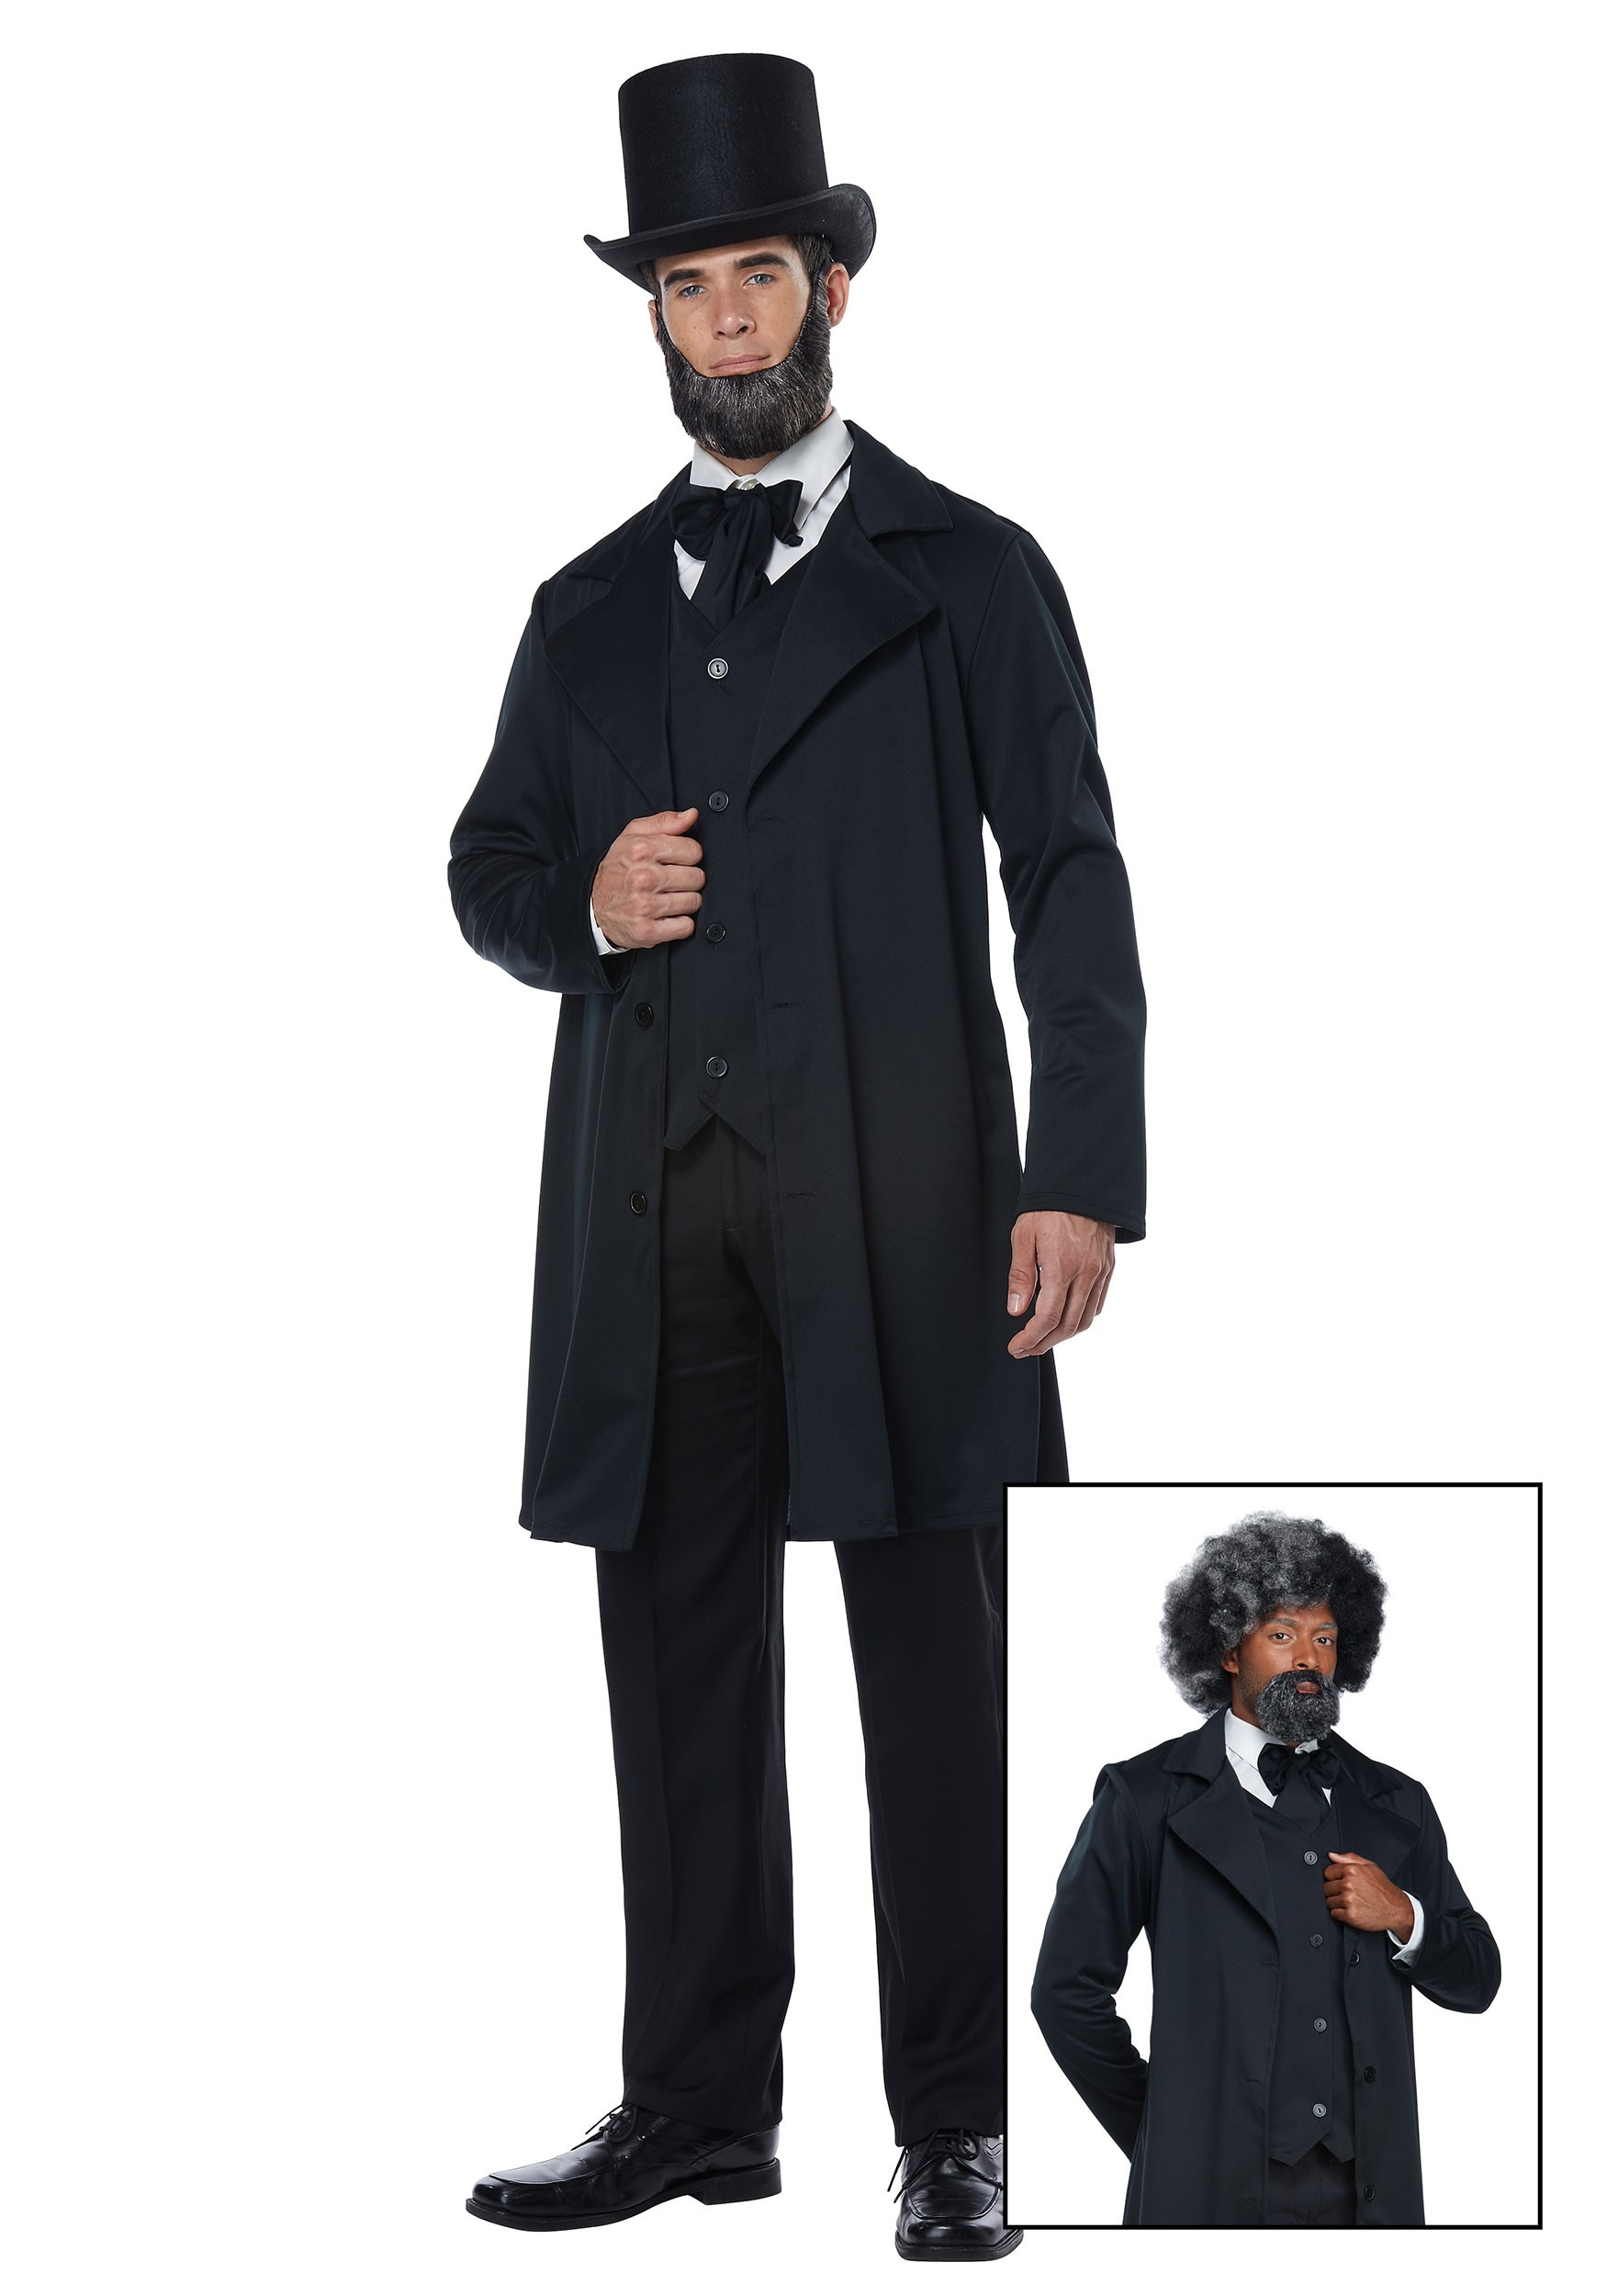 Frederick Douglass/Abraham Lincoln Adult Costume , Adult Historical Costumes